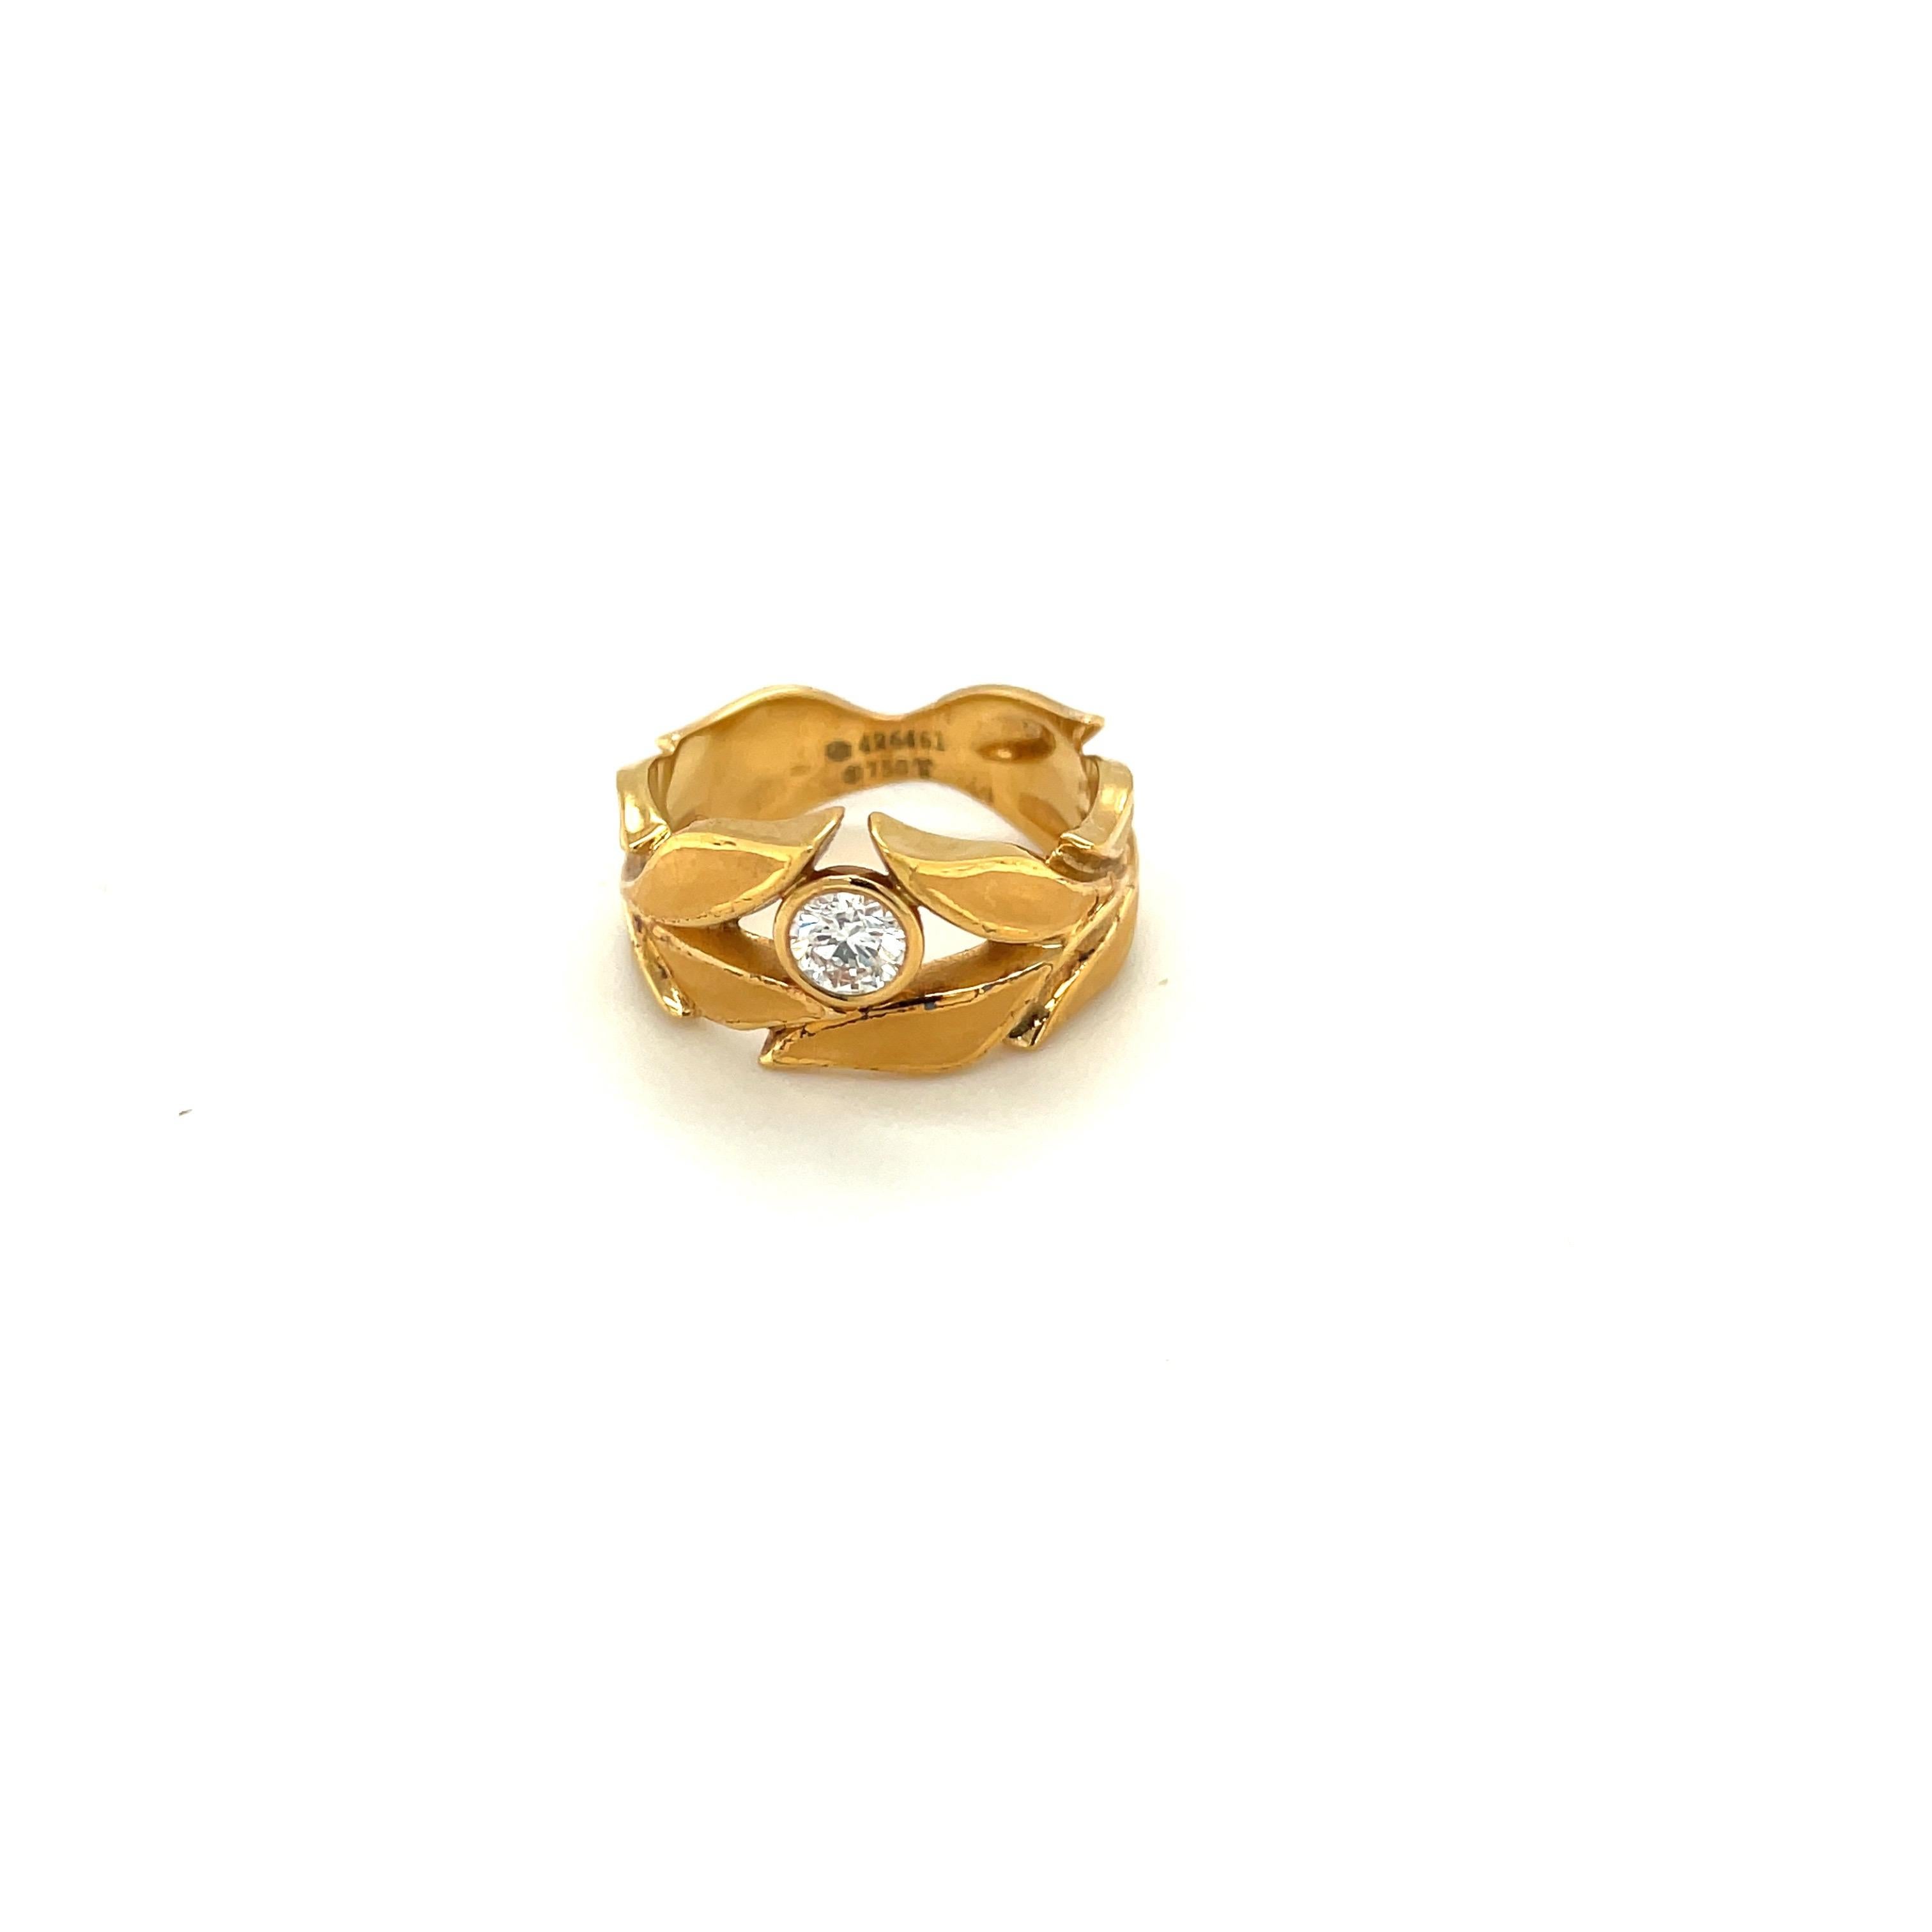 Carrera Y Carrera has built its famous name on figurative designs, an obsession with surface finishes, and a compelling way of seeing beauty in art and nature. This 18 karat yellow gold ring is a perfect example of Carrera's iconic designs. 
From